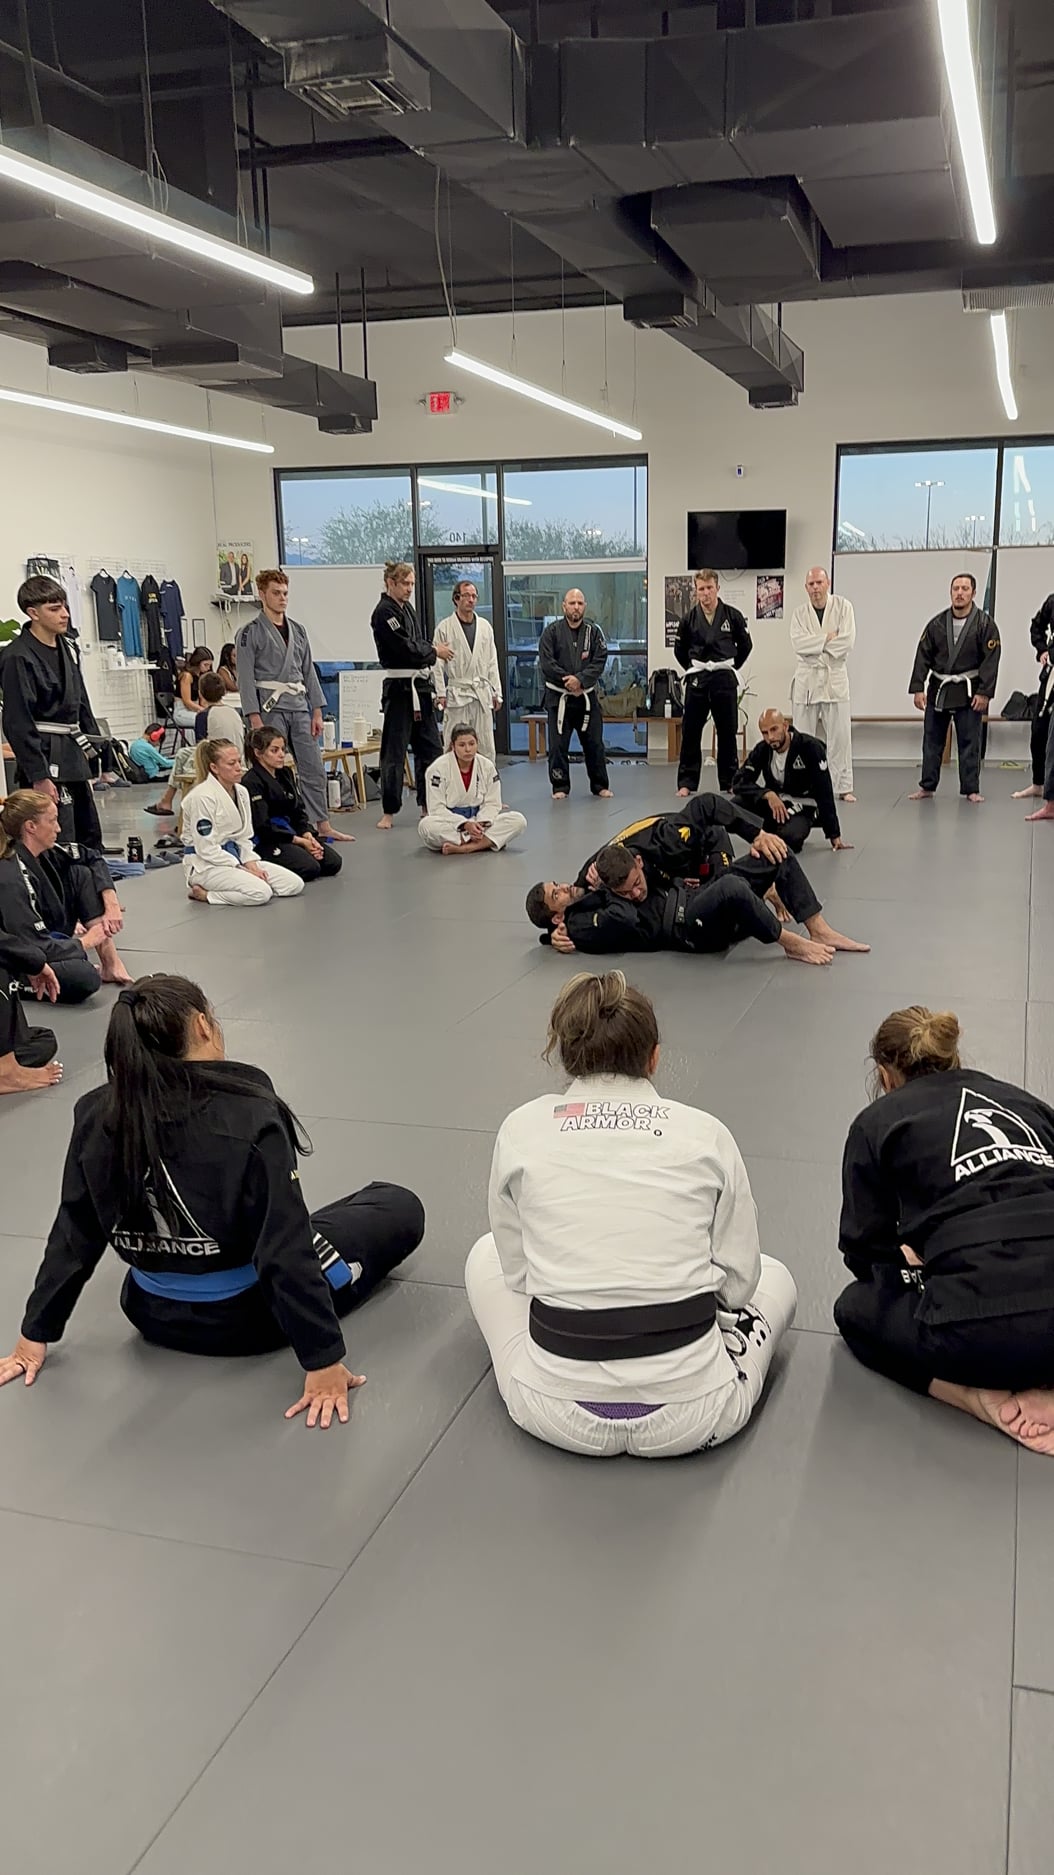 Alliance Jiu Jitsu – Vail Independence Day: New Student Special